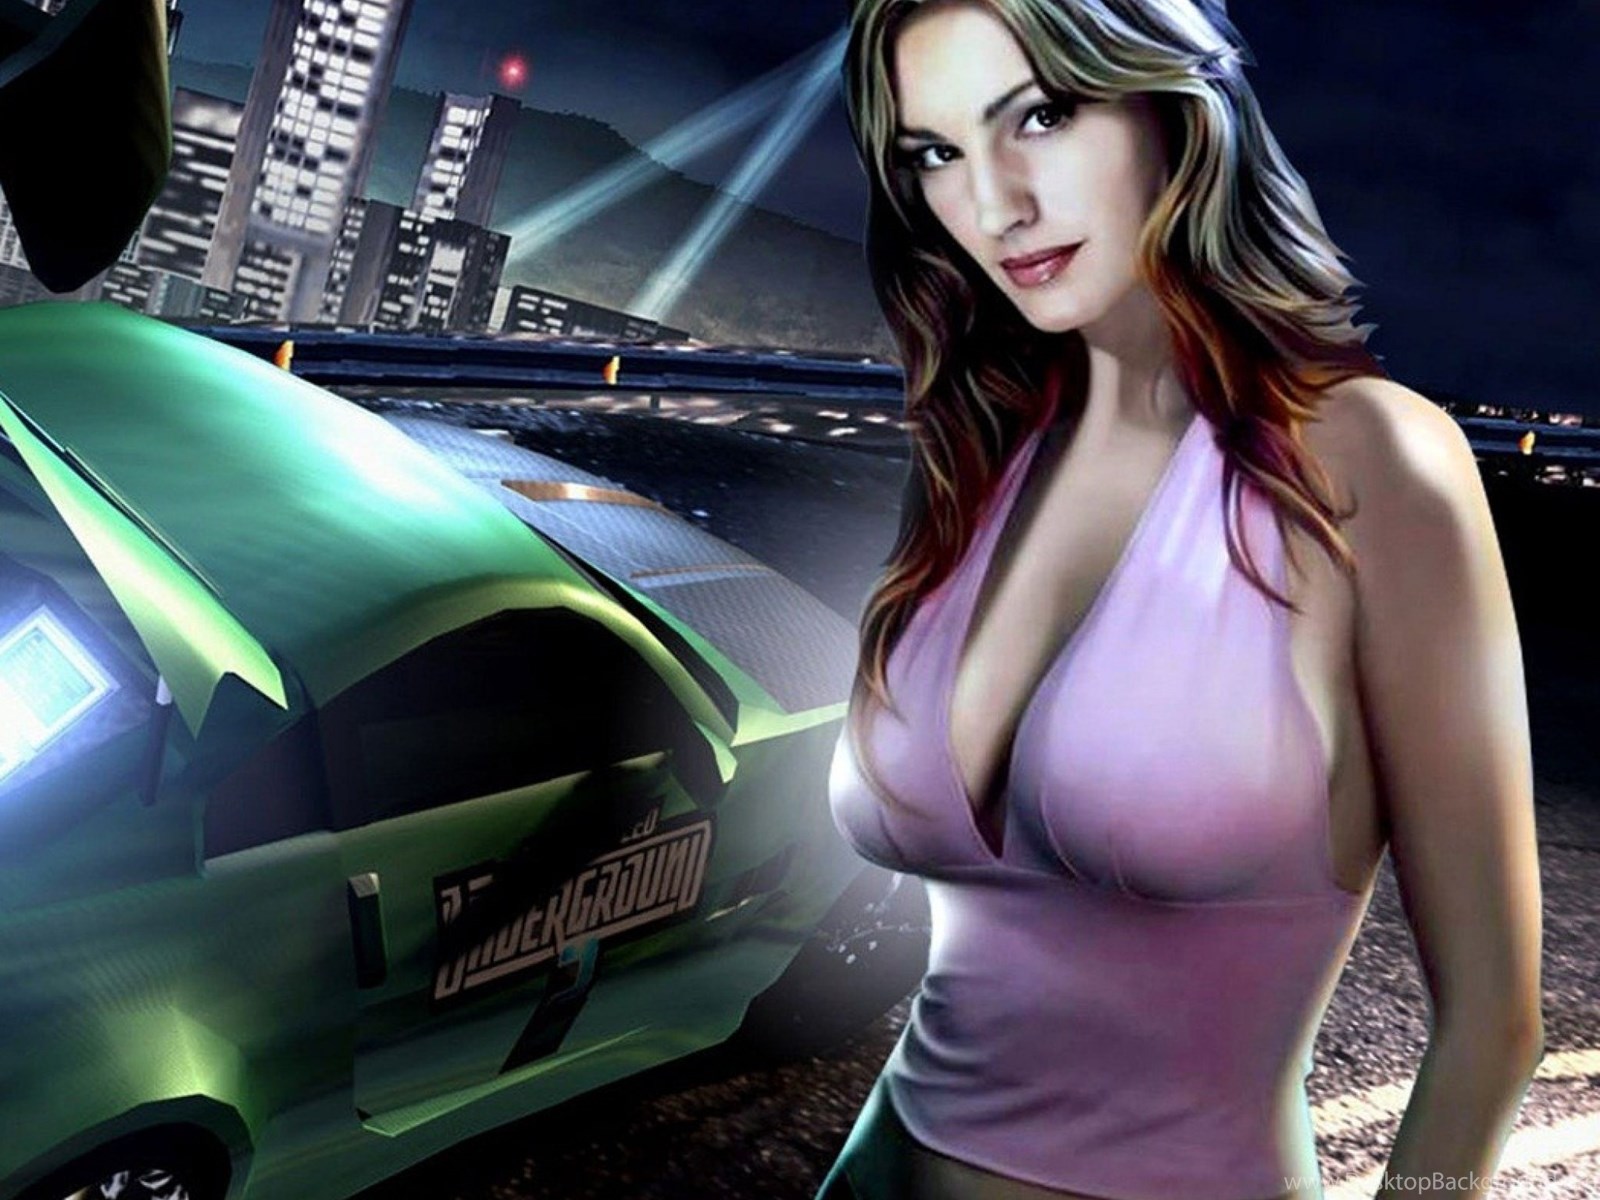 Ea did another naked photo session to promote need for speed game